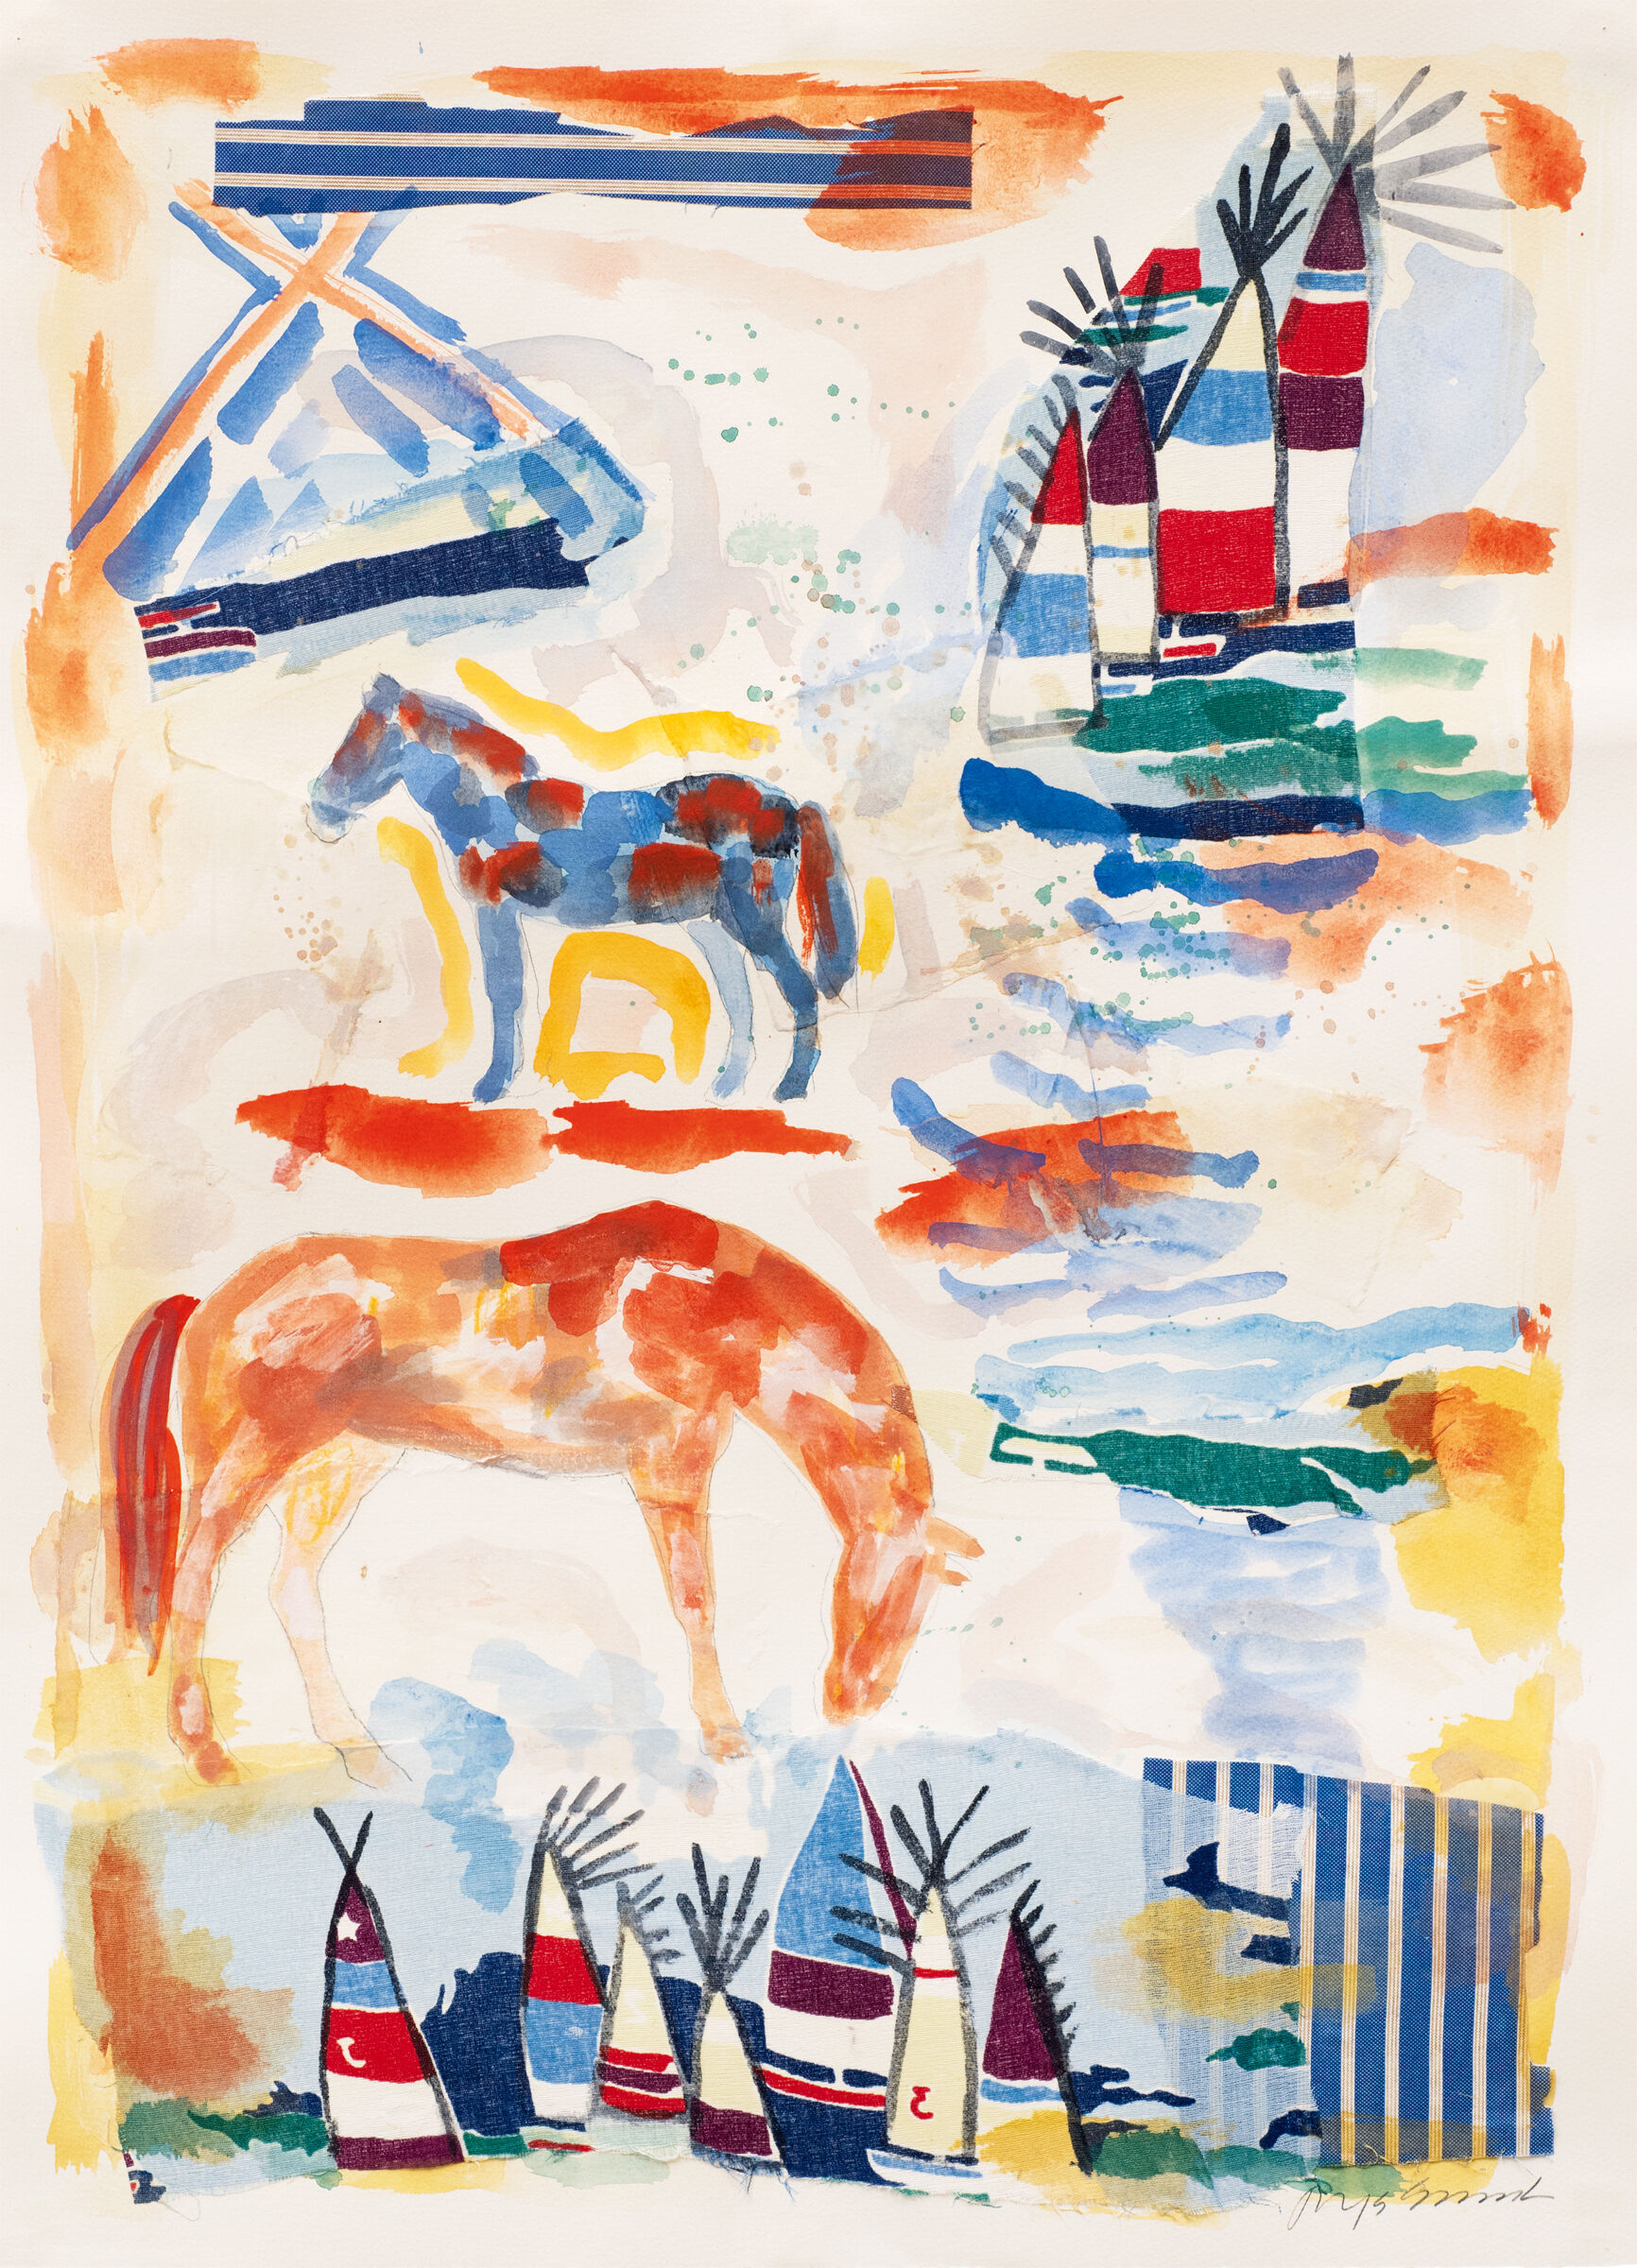 Horses and ships made of patches of translucent color are scattered over the paper.